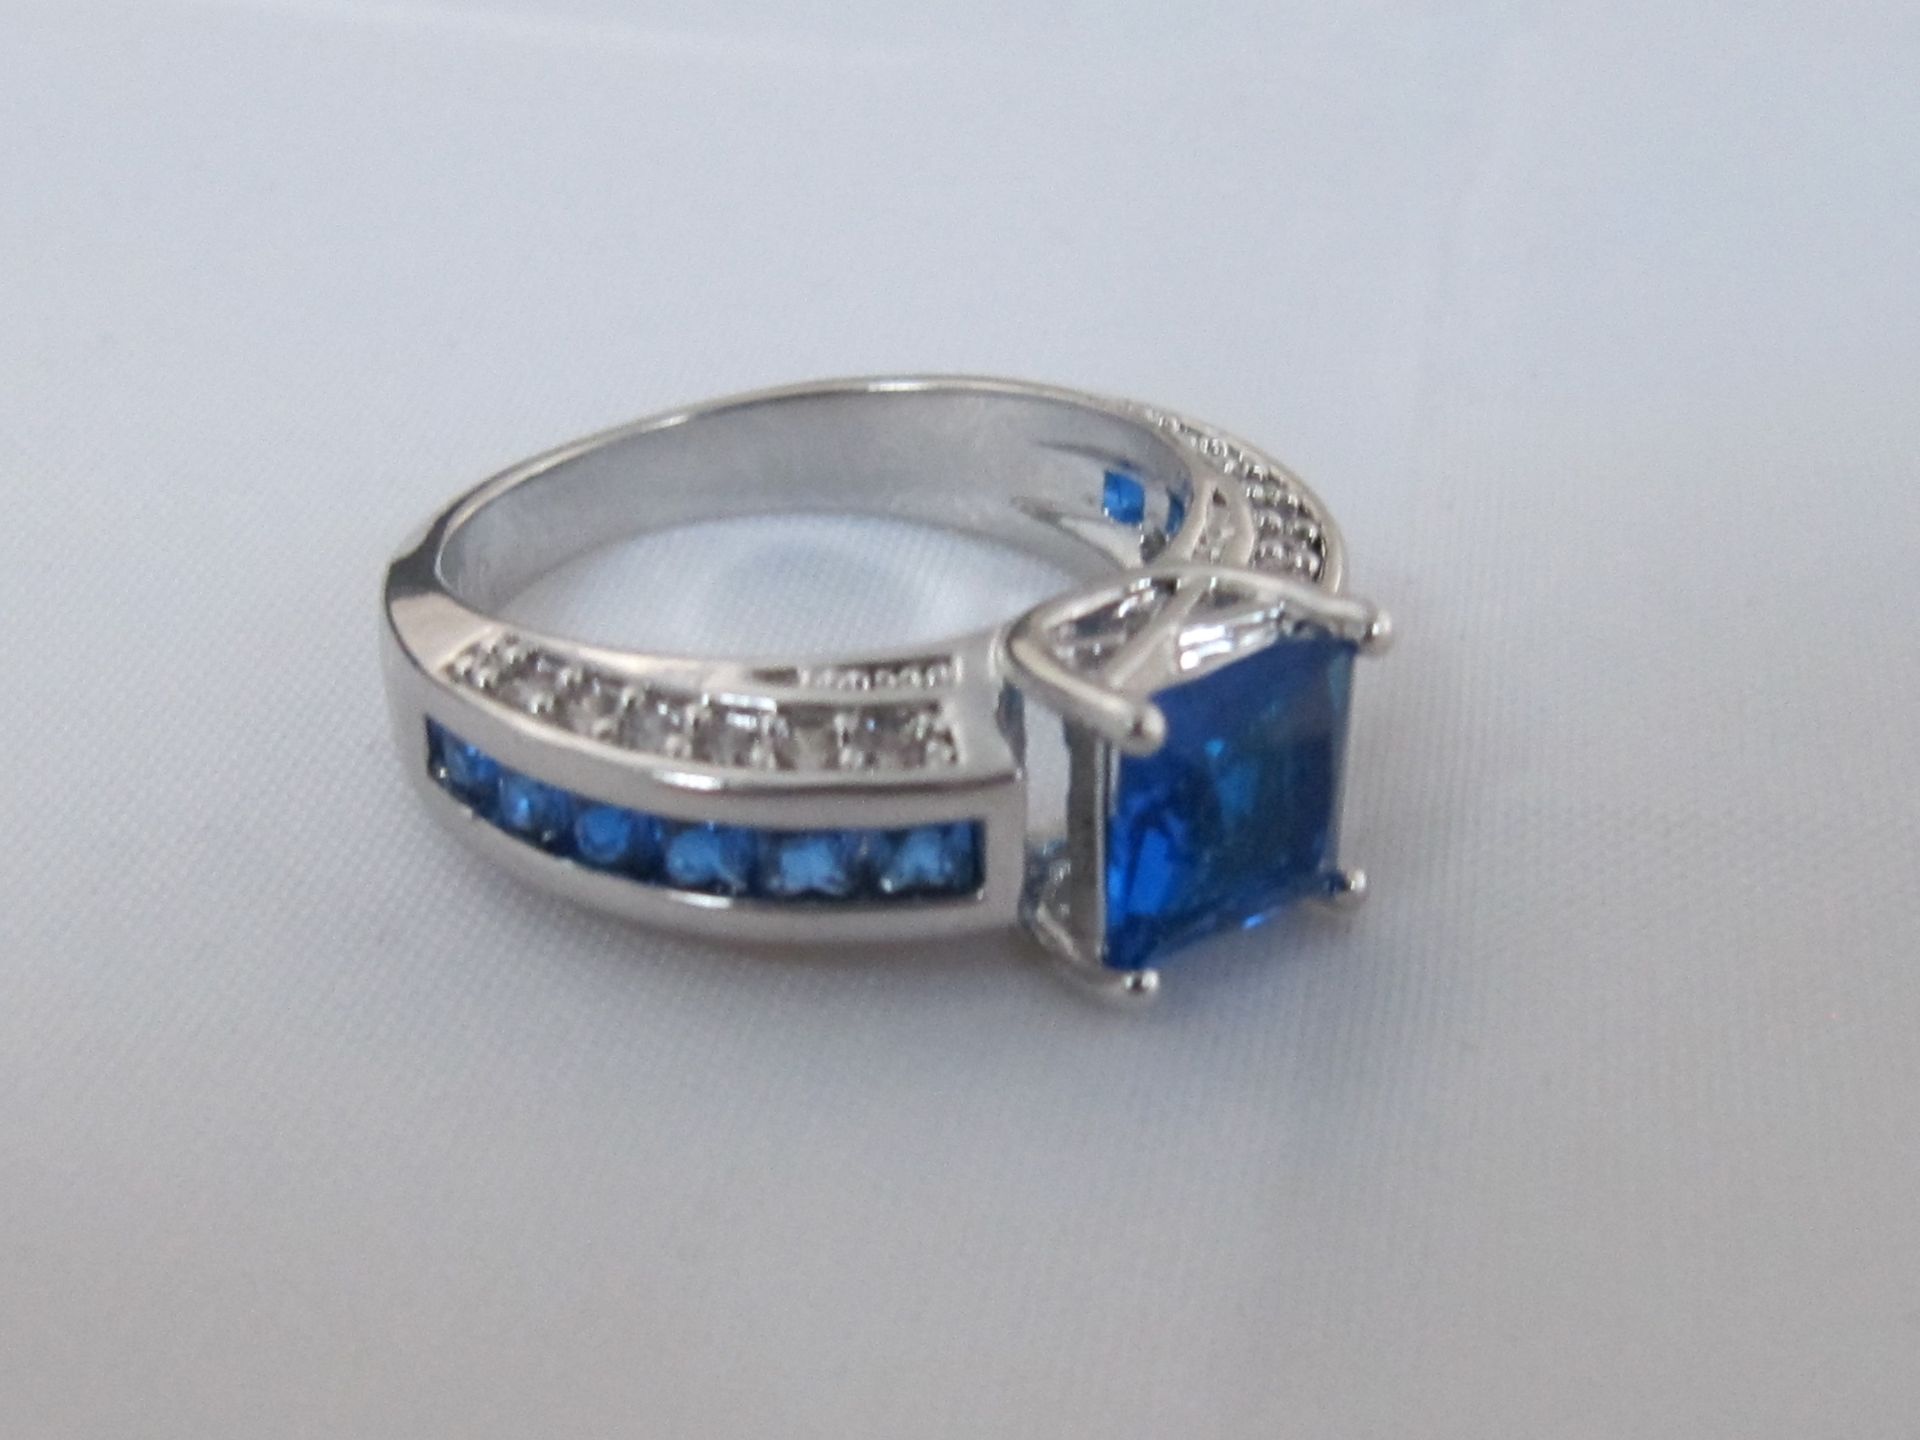 10k White Gold Filled with Blue Sapphires. Size M.